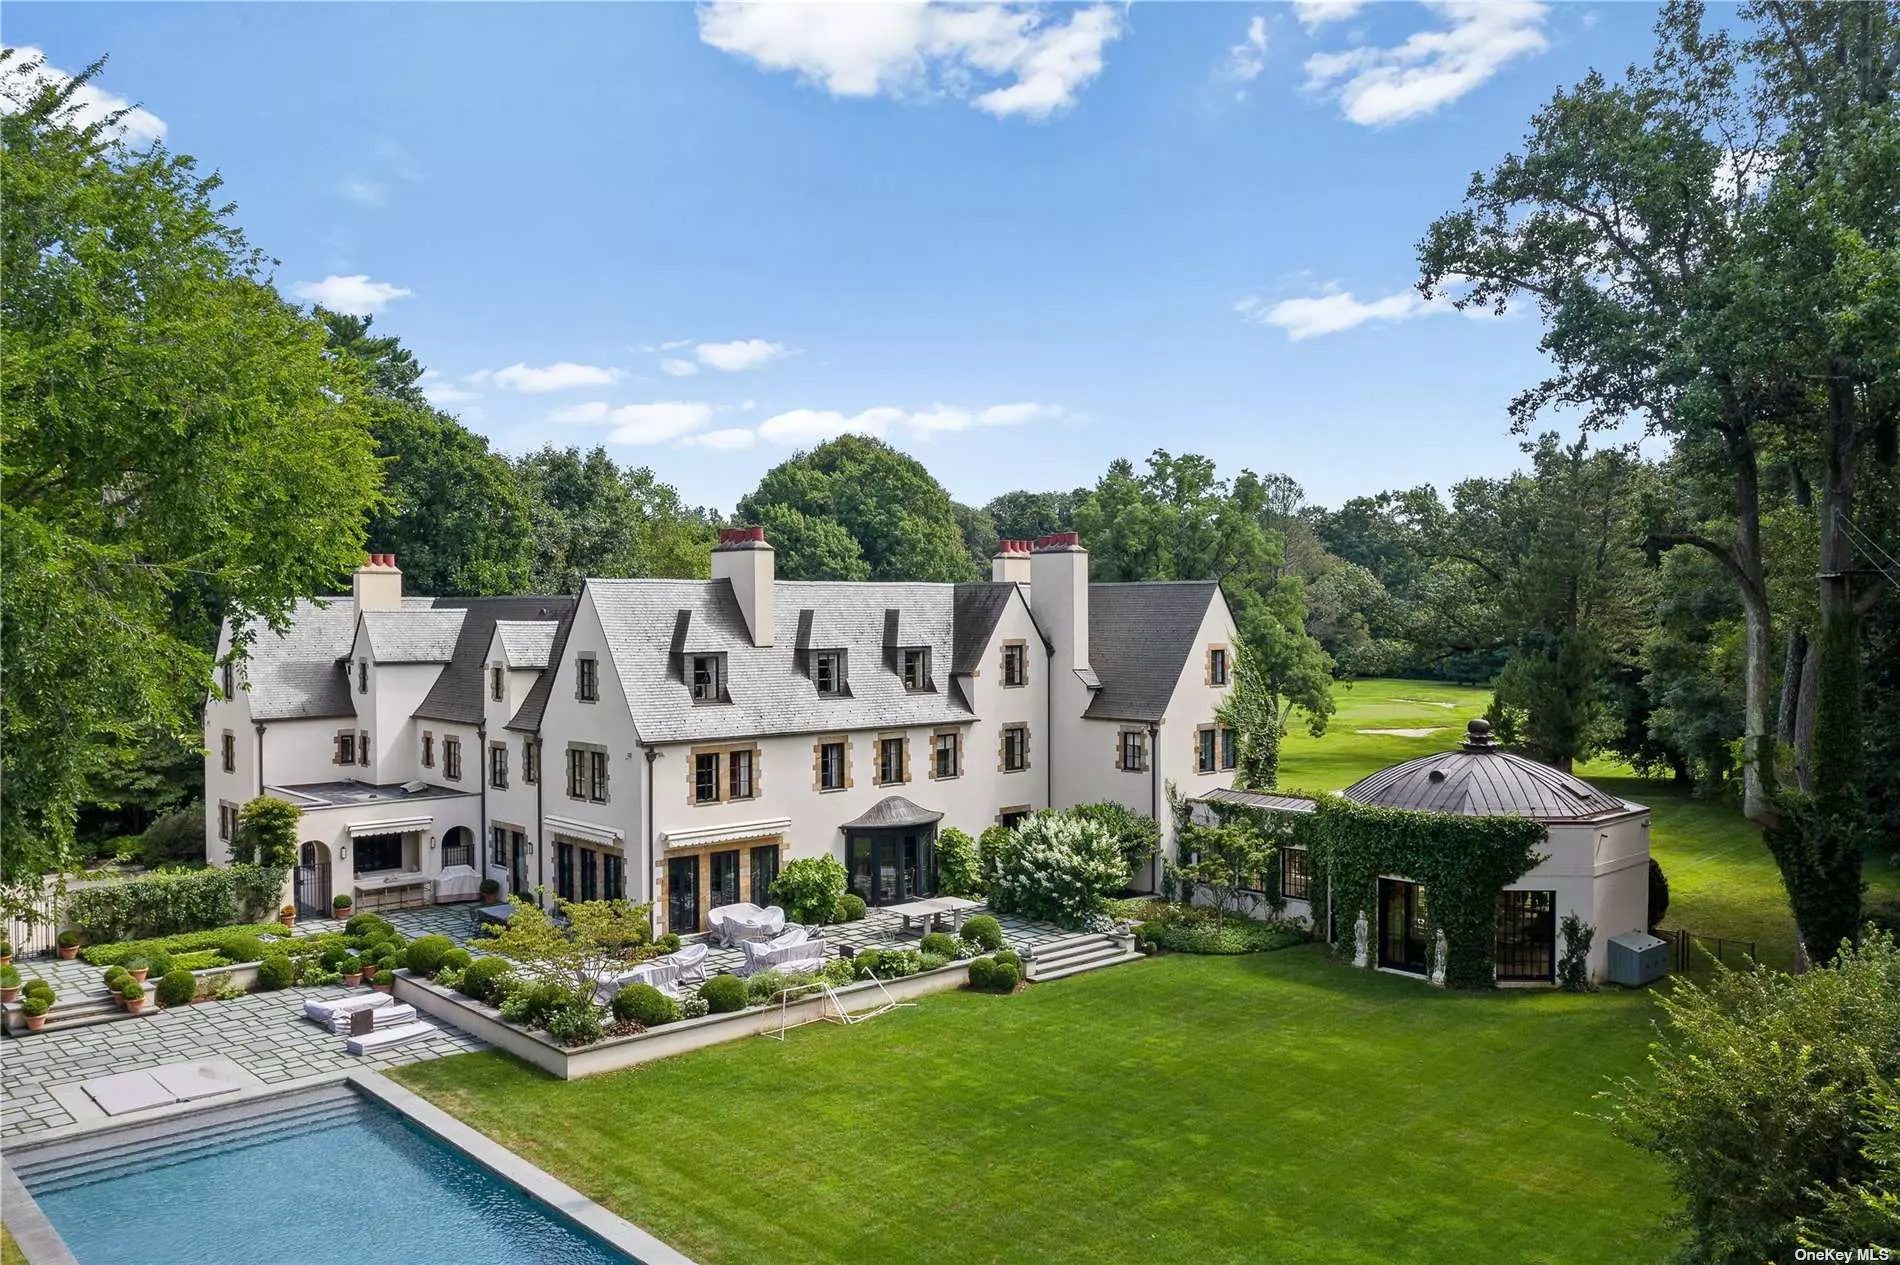 Located in the prestigious Village of Matinecock, this Historic 1926 French Normandy on 6+ Prime Acres originally built for J.D Lyons by Delano and Aldrich. Oliver Cope, Architect, Miles Redd, Interior Designer and Ed Hollander Landscape Architect have Transformed this Manor into a True Masterpiece. Luxurious Living with Intimate Rooms Designed for a Modern Lifestyle. An Exceptional Addition of an Octagonal Room Makes this One of A Kind Home Even More Special. Quality Updates Throughout Meld with Original Details Including Antique Parquet Wood Floors, 12 Fireplaces, Fine Paneling and Mouldings. Tranquil Property offers a Pool, Pool House, Tennis Court, Outdoor Kitchen, Gardens and Terraces. Elevator, Nest System, 3, 000 Bottle Wine Cellar, Art Studio, Finished Lower Level, Updated HVAC, Geothermal Heat, Separate Garage. Simply Exquisite.